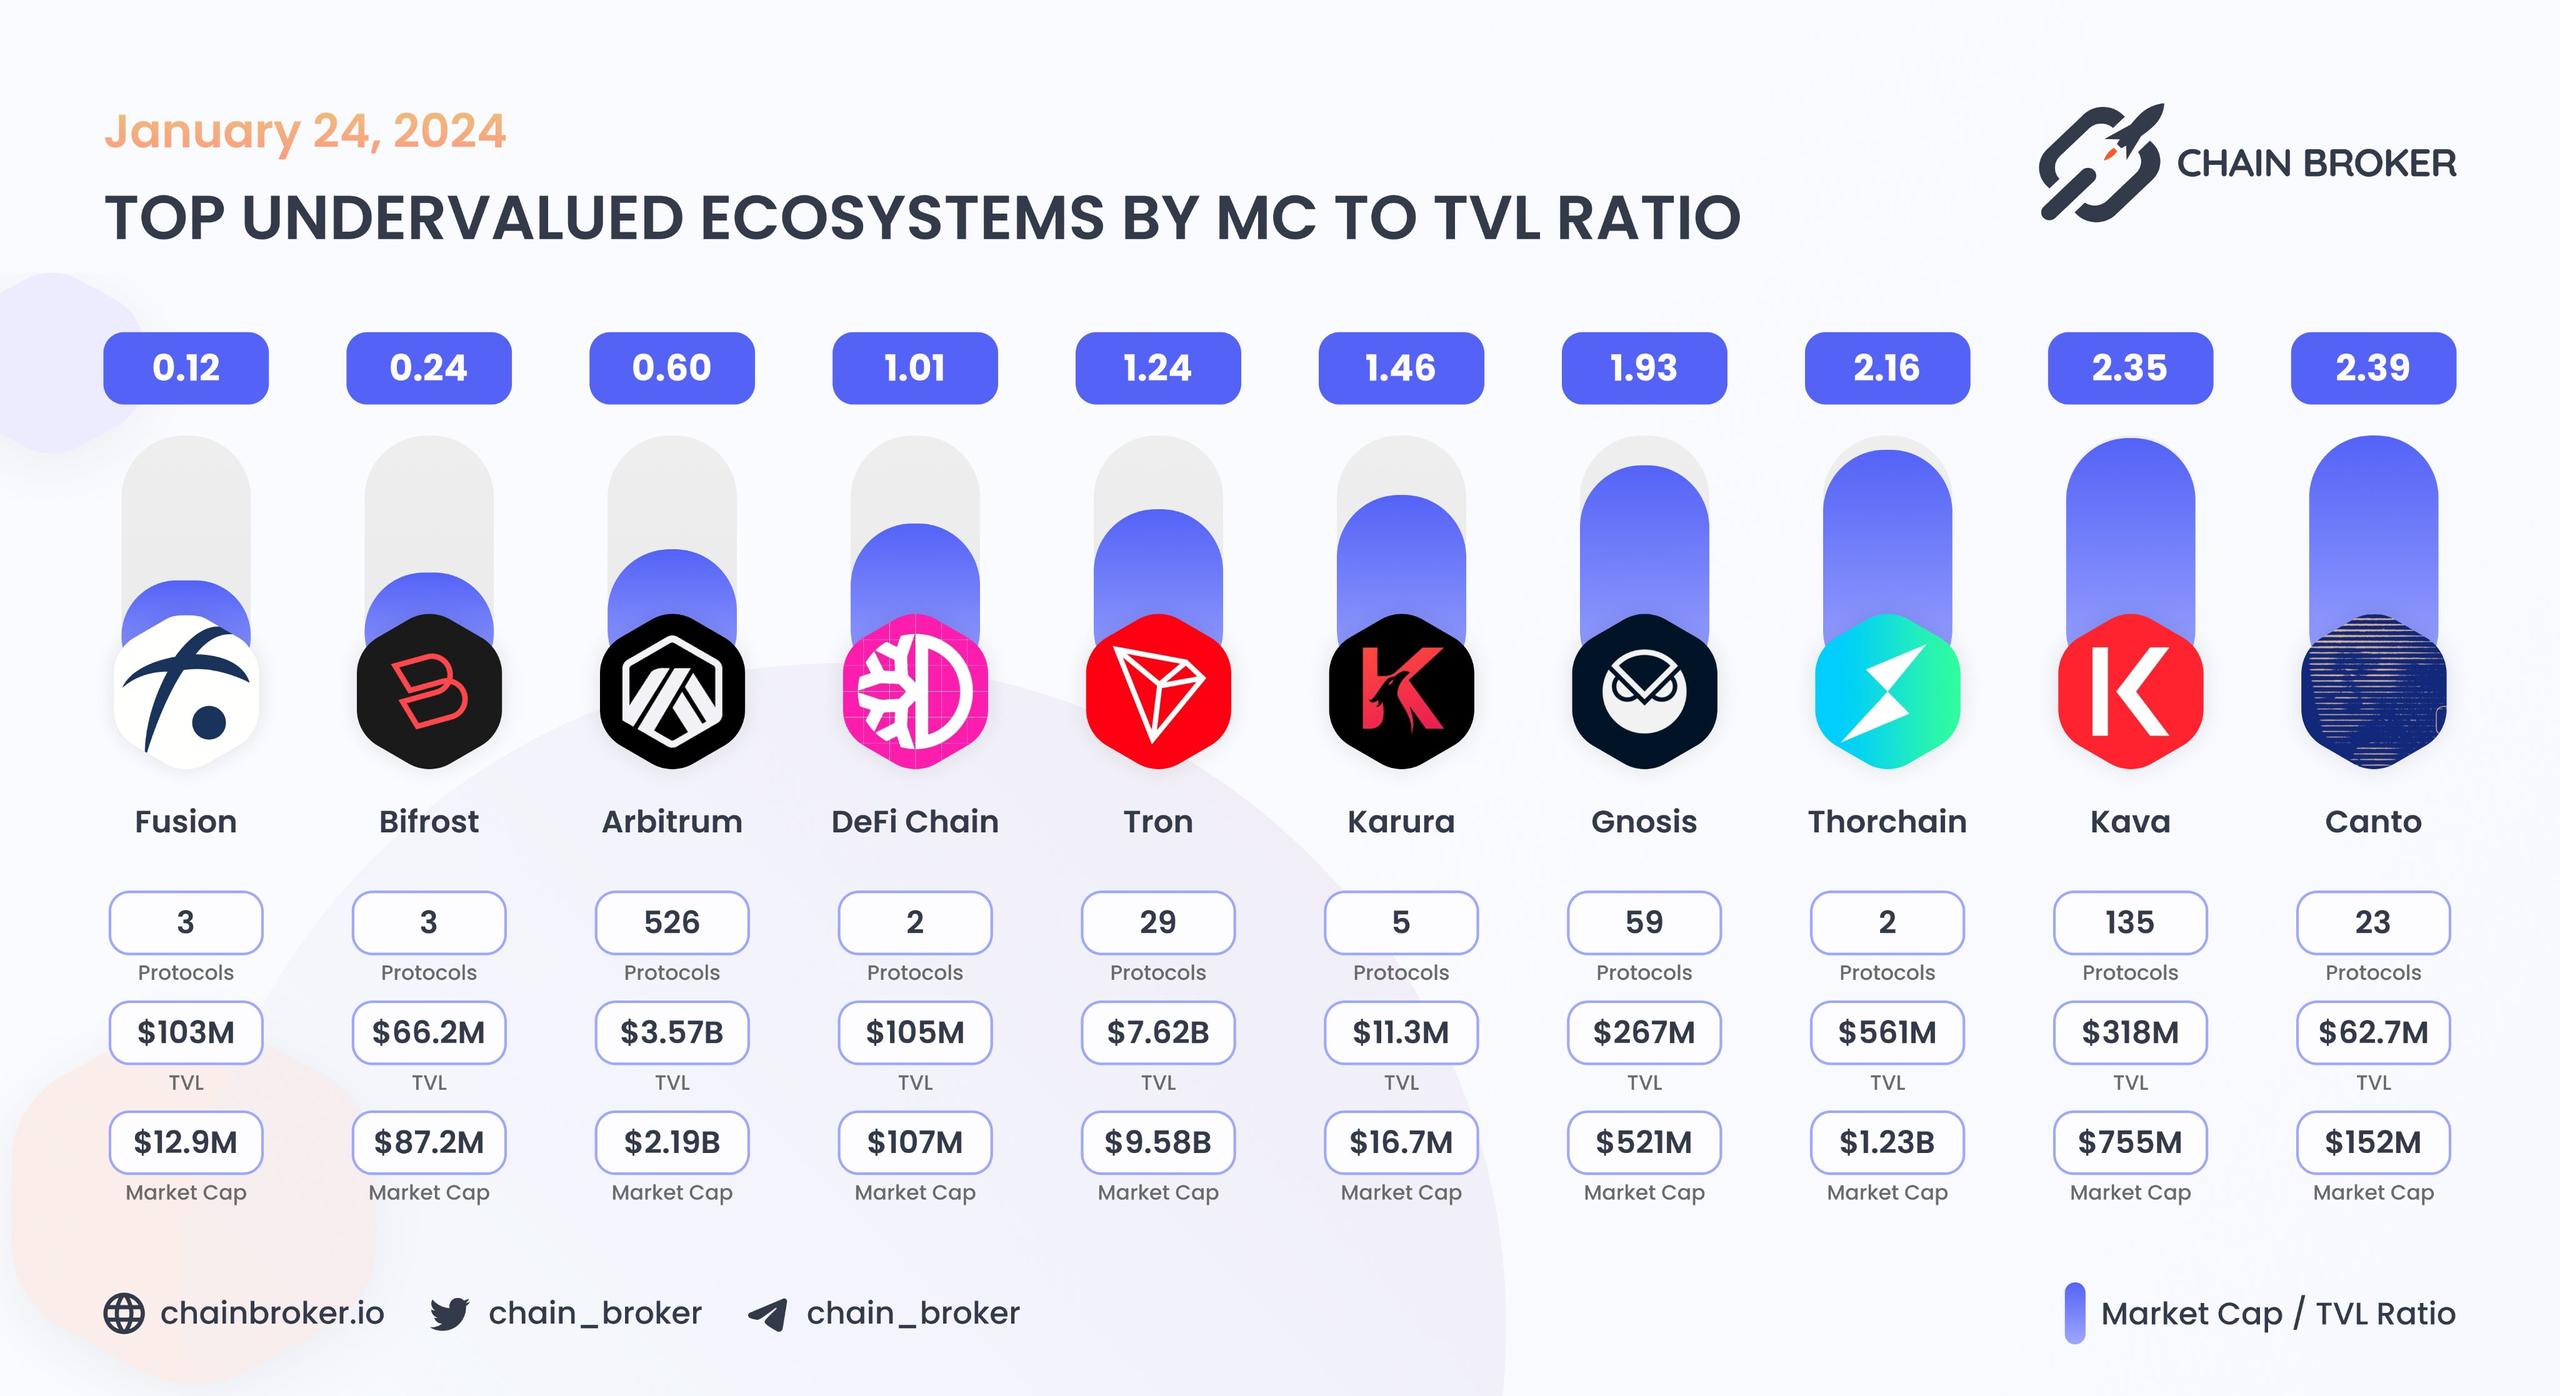 Top undervalued ecosystems by MC/TVL Ratio